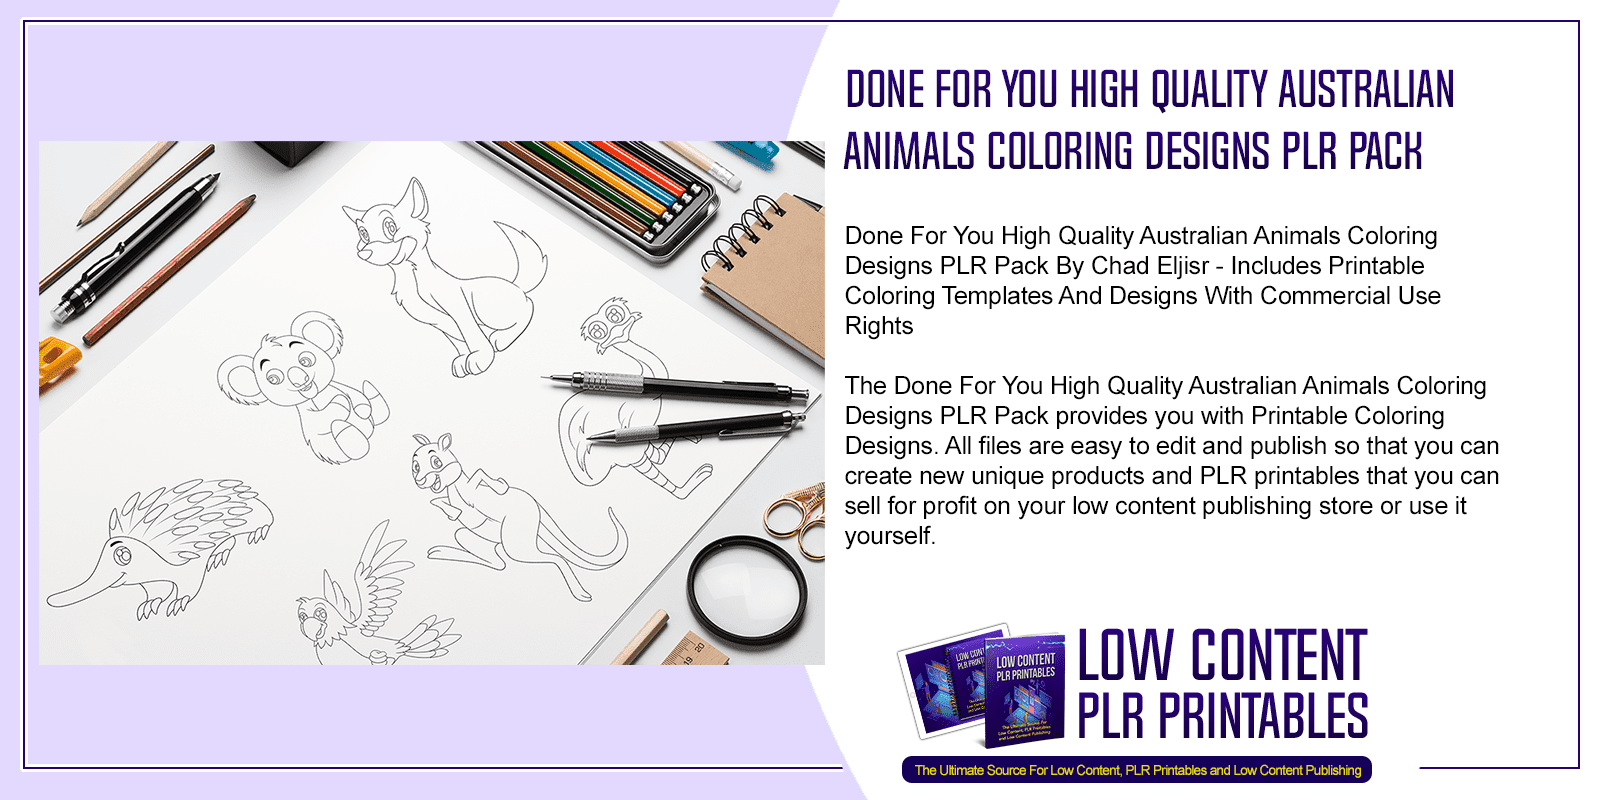 Done For You High Quality Australian Animals Coloring Designs PLR Pack